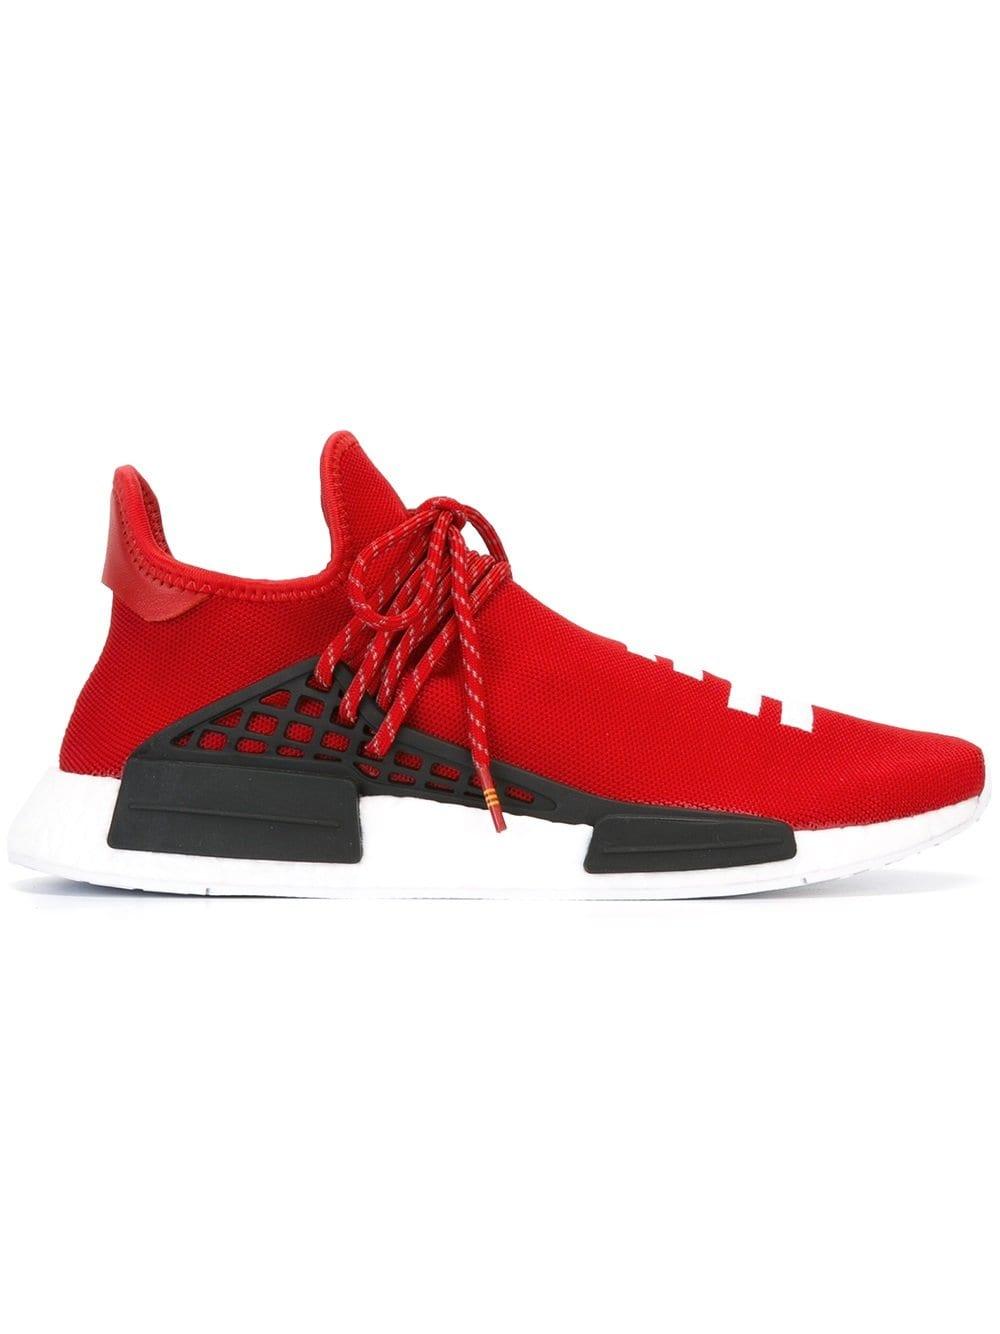 adidas Pharrell X Hu Nmd Red Human Race Sneakers for Men | Lyst